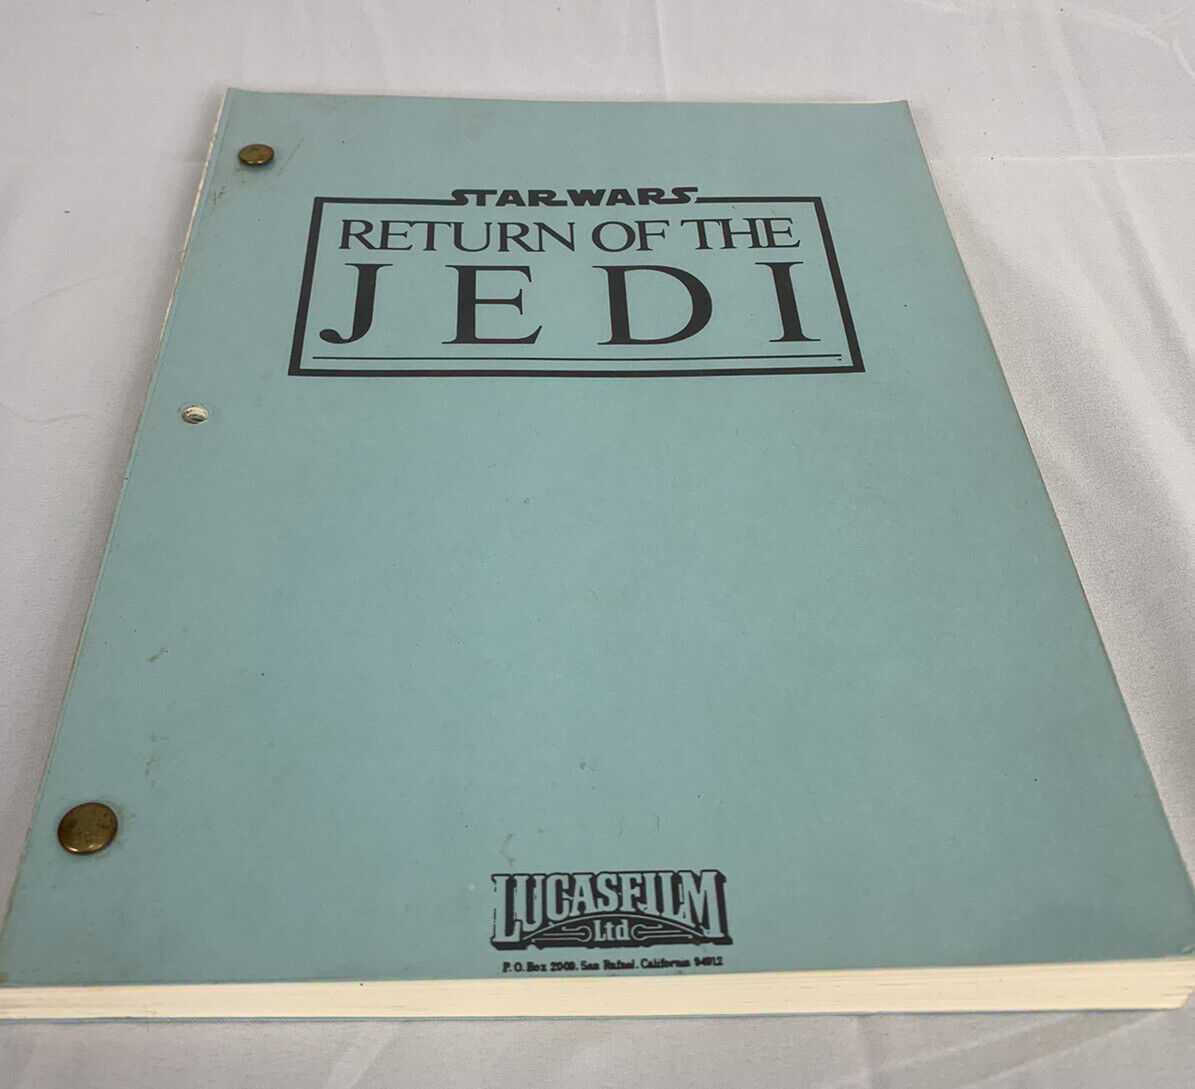 Star Wars Episode VI Manuscript - Extremely Rare High End Star Wars Collectable